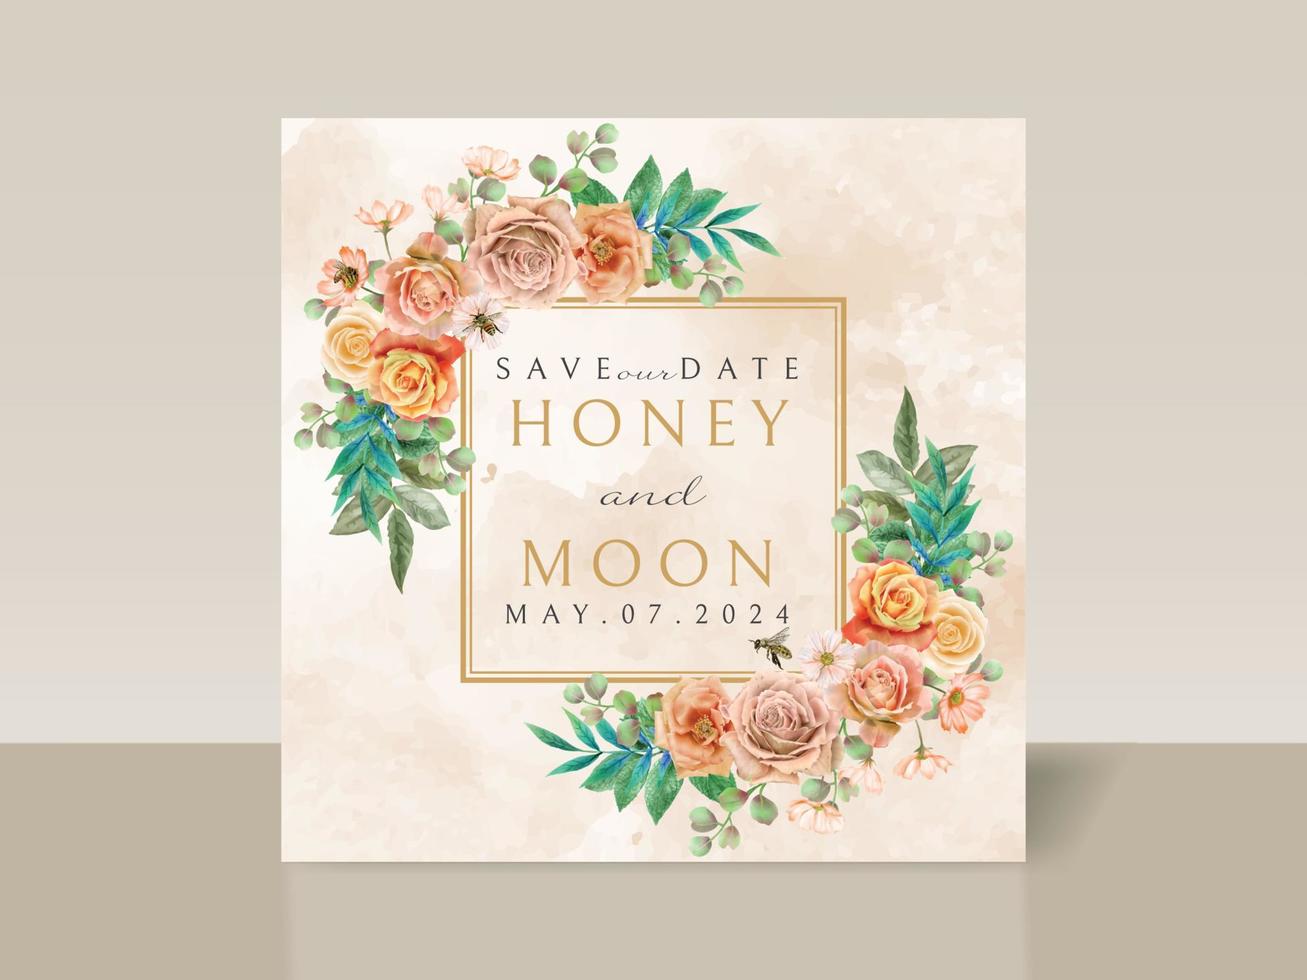 Beautiful floral and bees wedding invitation card vector